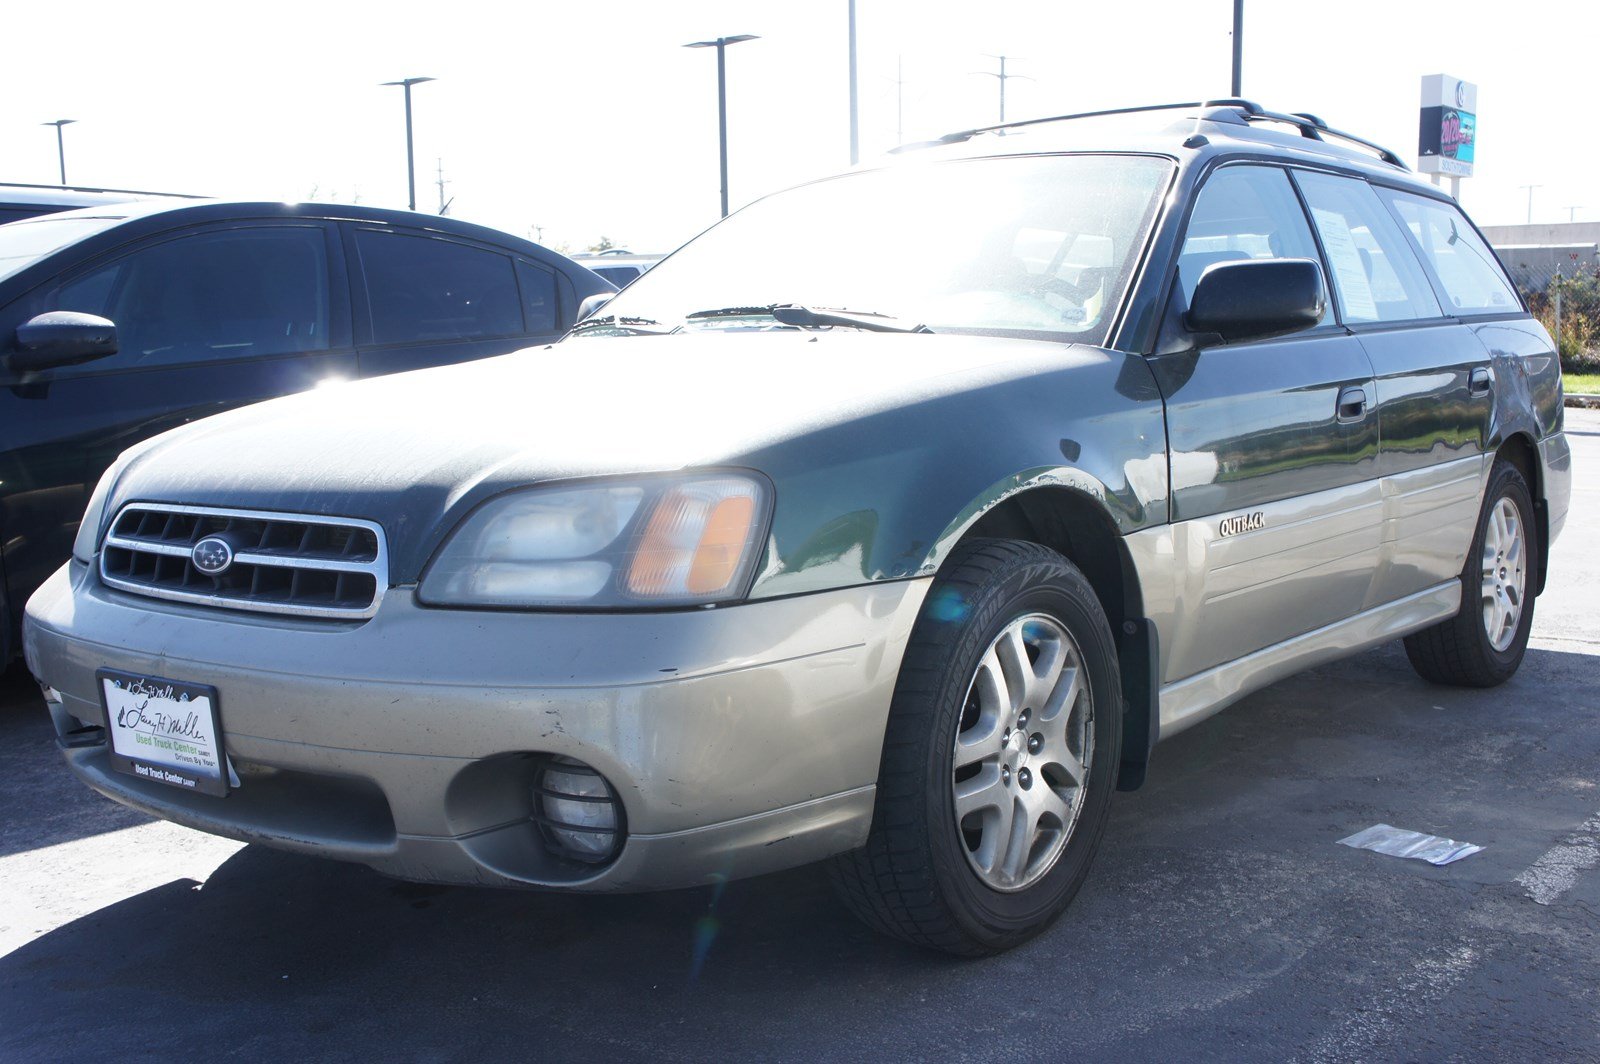 PreOwned 2001 Subaru Legacy Wagon Outback w/RB Equip